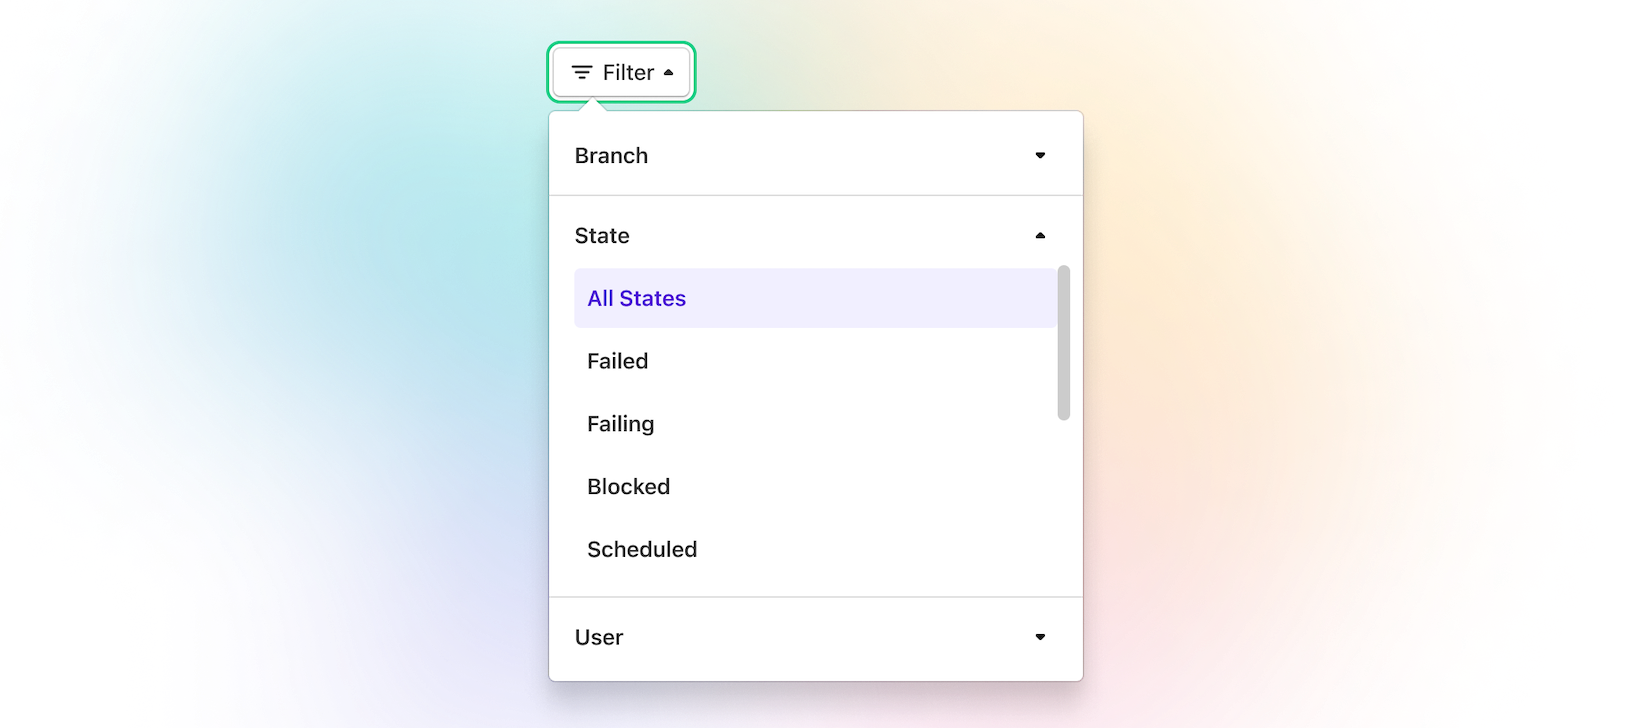 Find what you care about faster. Filter to see your own builds, in‑progress builds, failed or all builds.